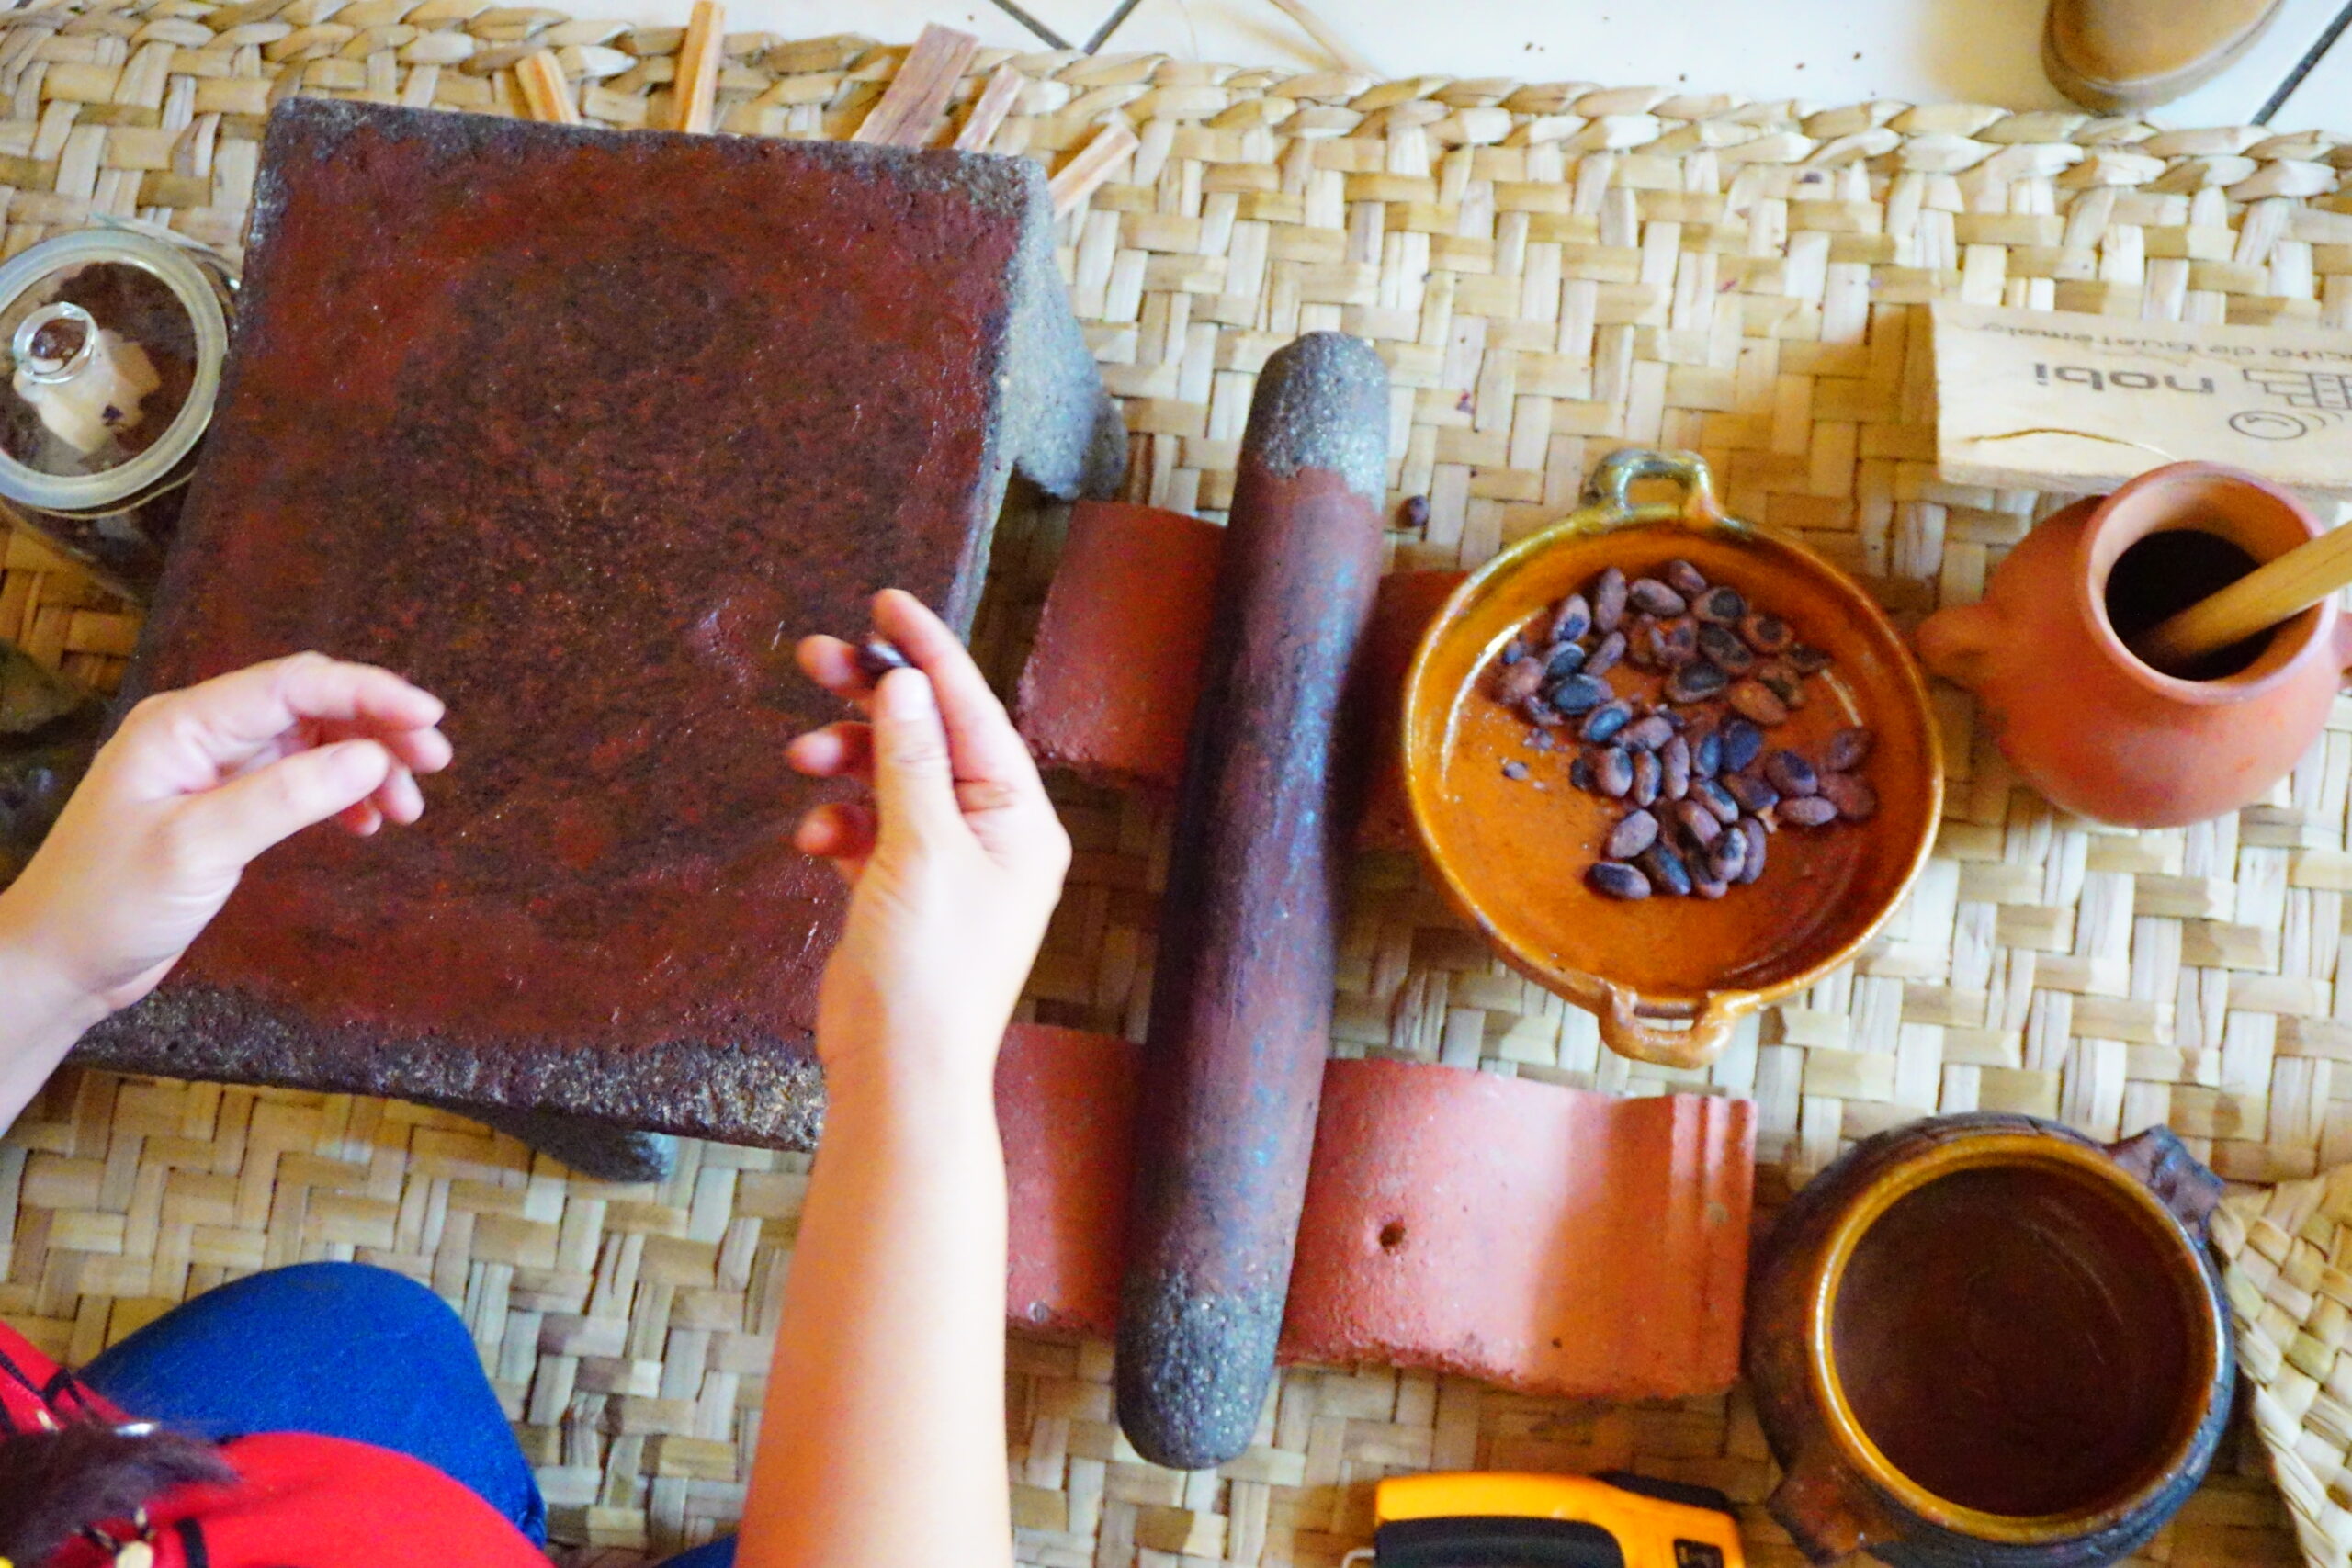 Ancient mayan chocolate making with metate grinding stone in Guatemala